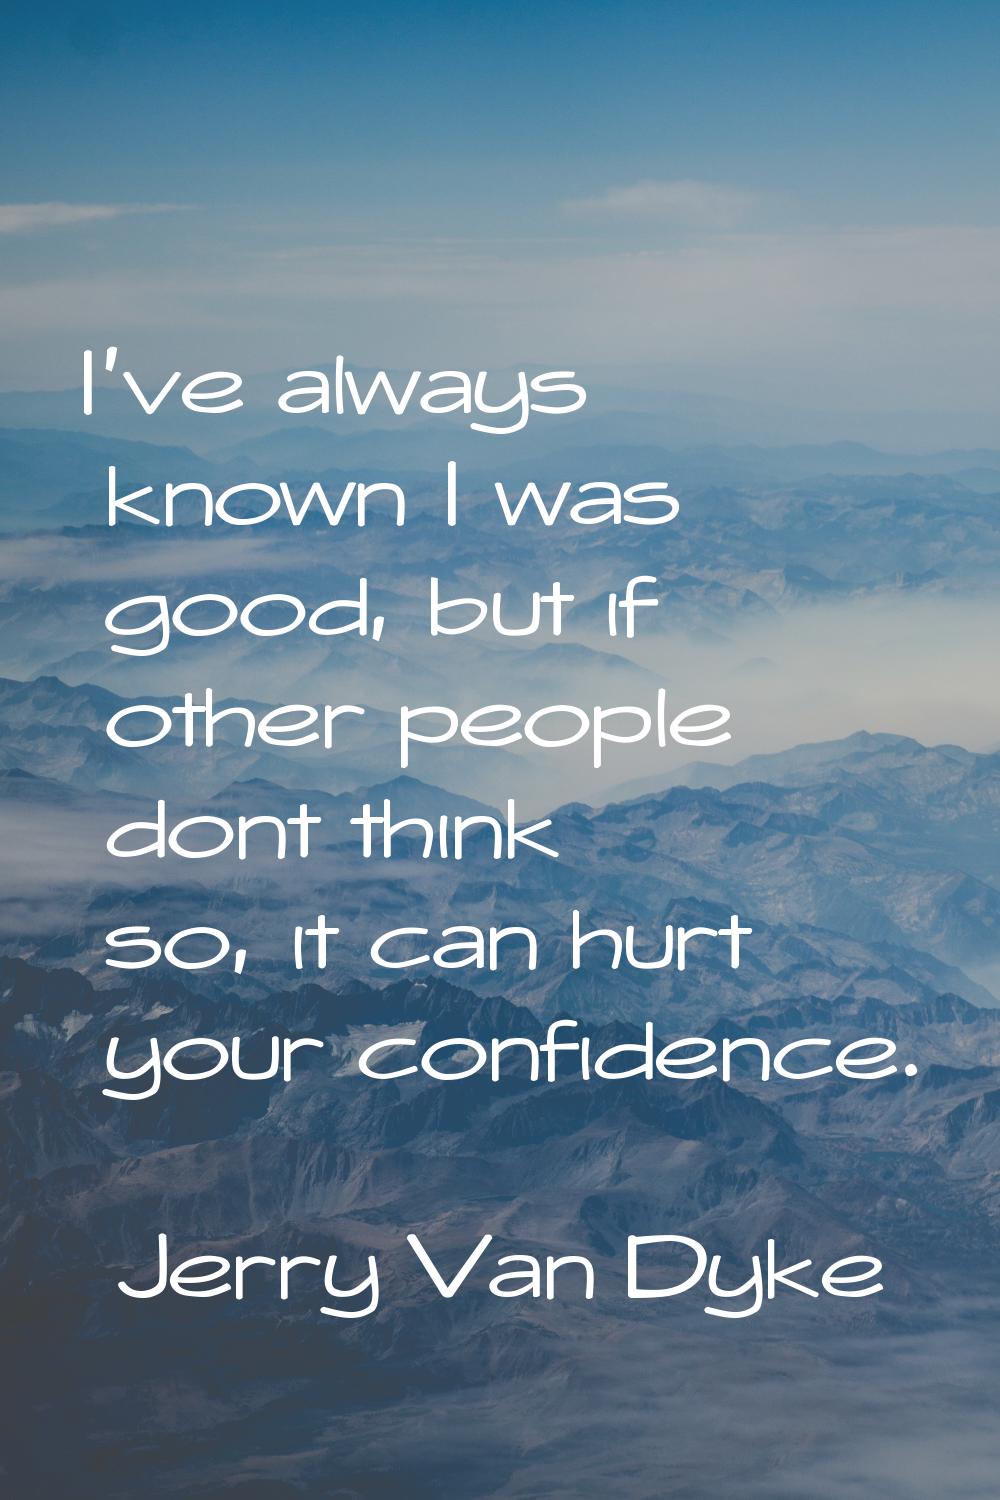 I've always known I was good, but if other people dont think so, it can hurt your confidence.